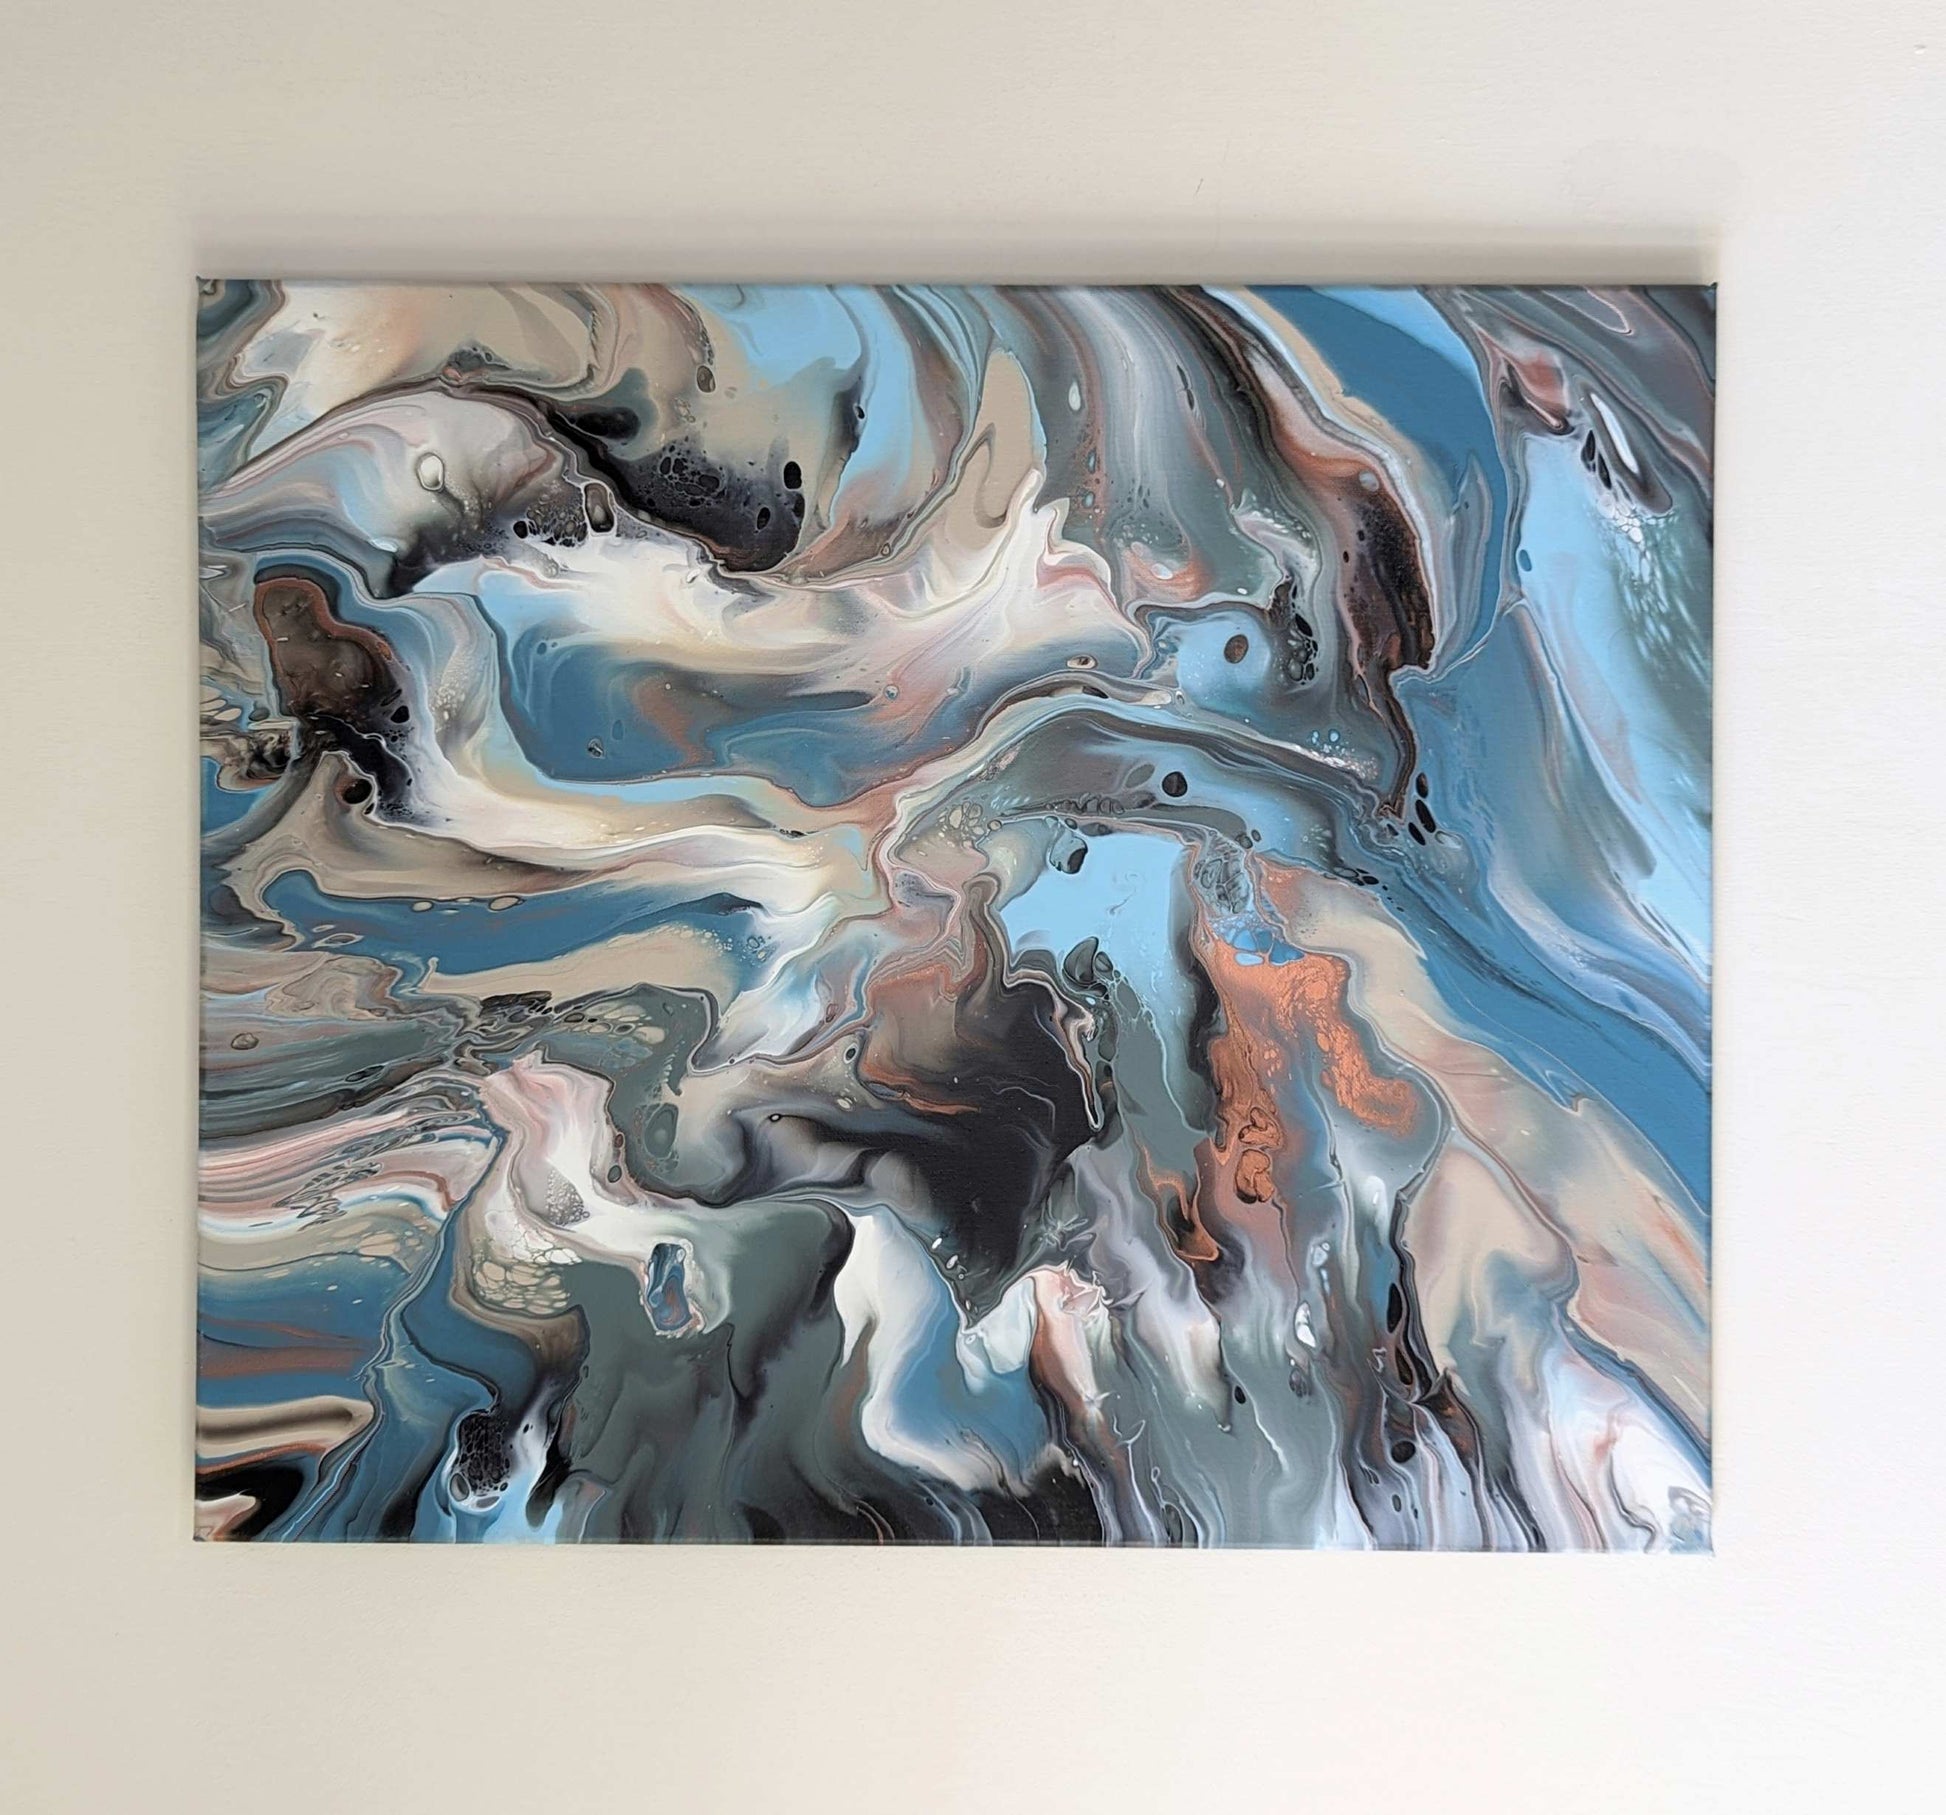 Canvas on wall – frontal view of original abstract painting in muted hues made with professional grade acrylic paint. Landscape orientation.